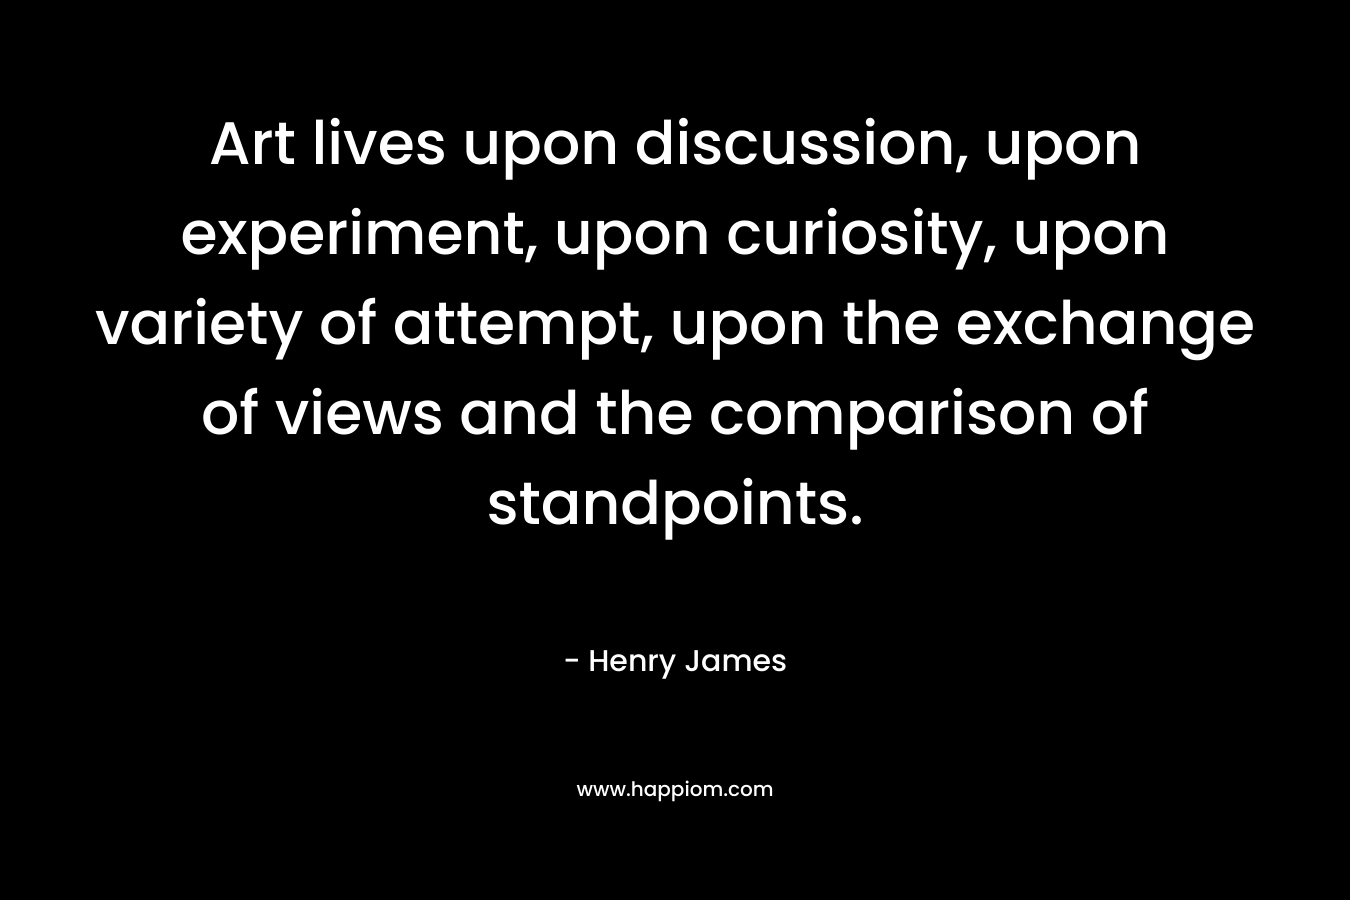 Art lives upon discussion, upon experiment, upon curiosity, upon variety of attempt, upon the exchange of views and the comparison of standpoints.